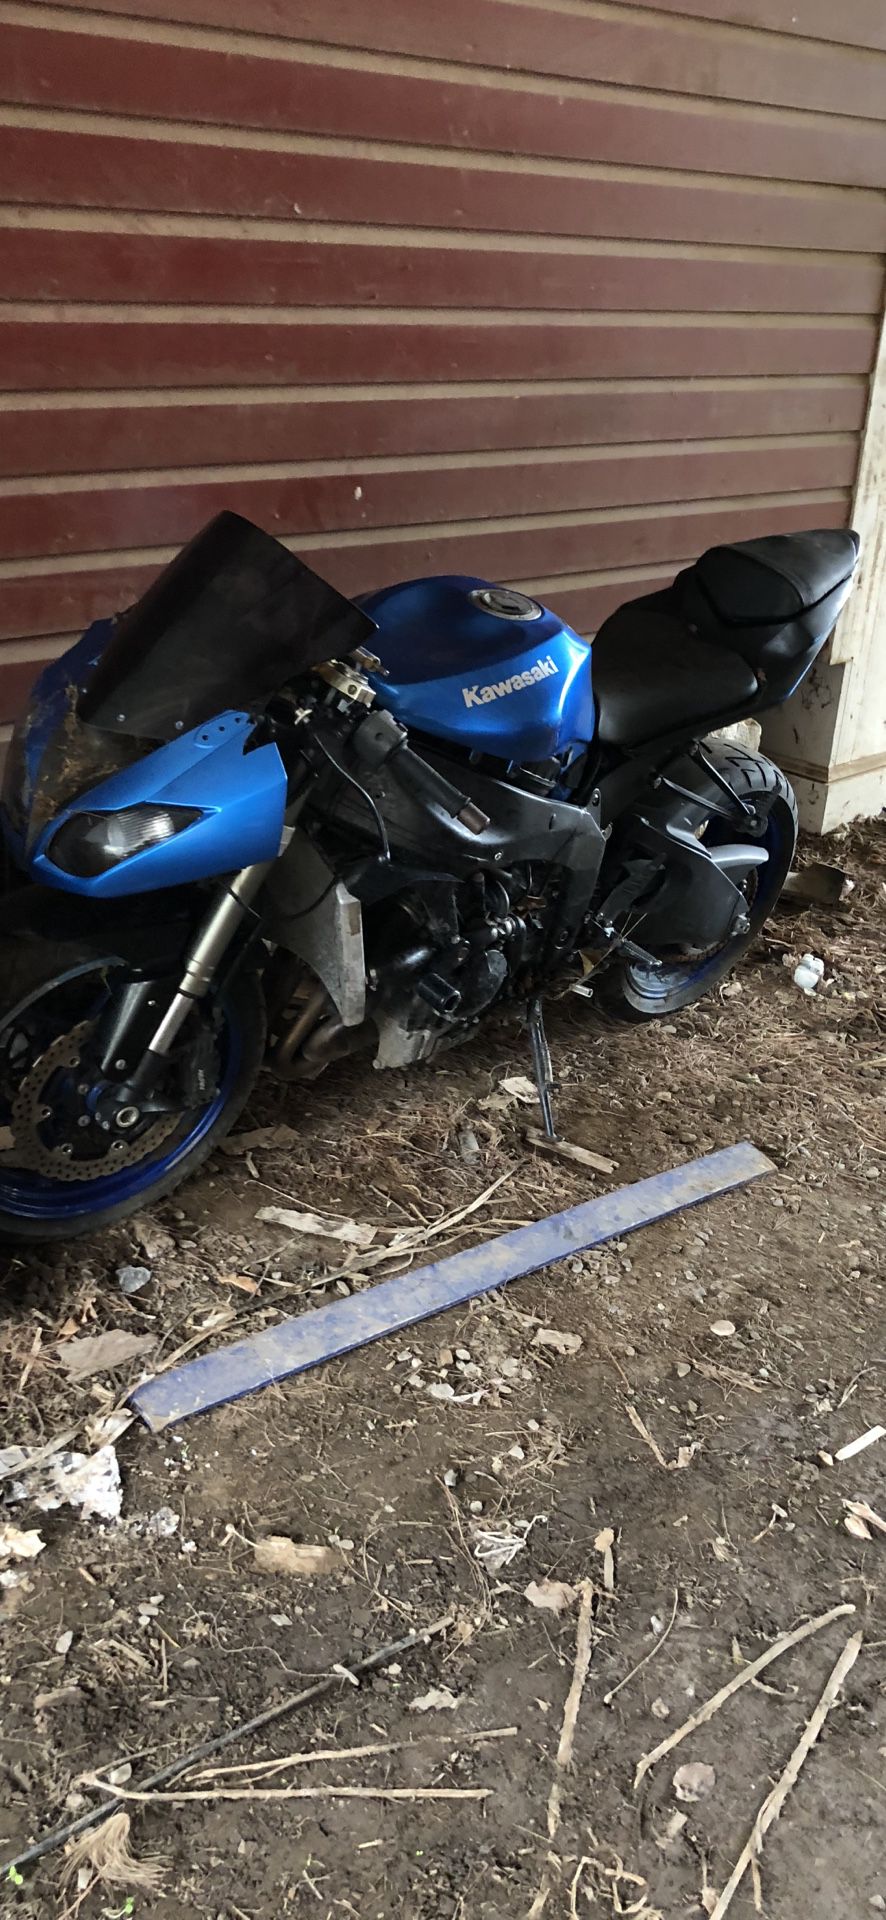 2009 Kawasaki ninja 600cc $600 Take as is, good engine and frame. Don’t have the tittle.